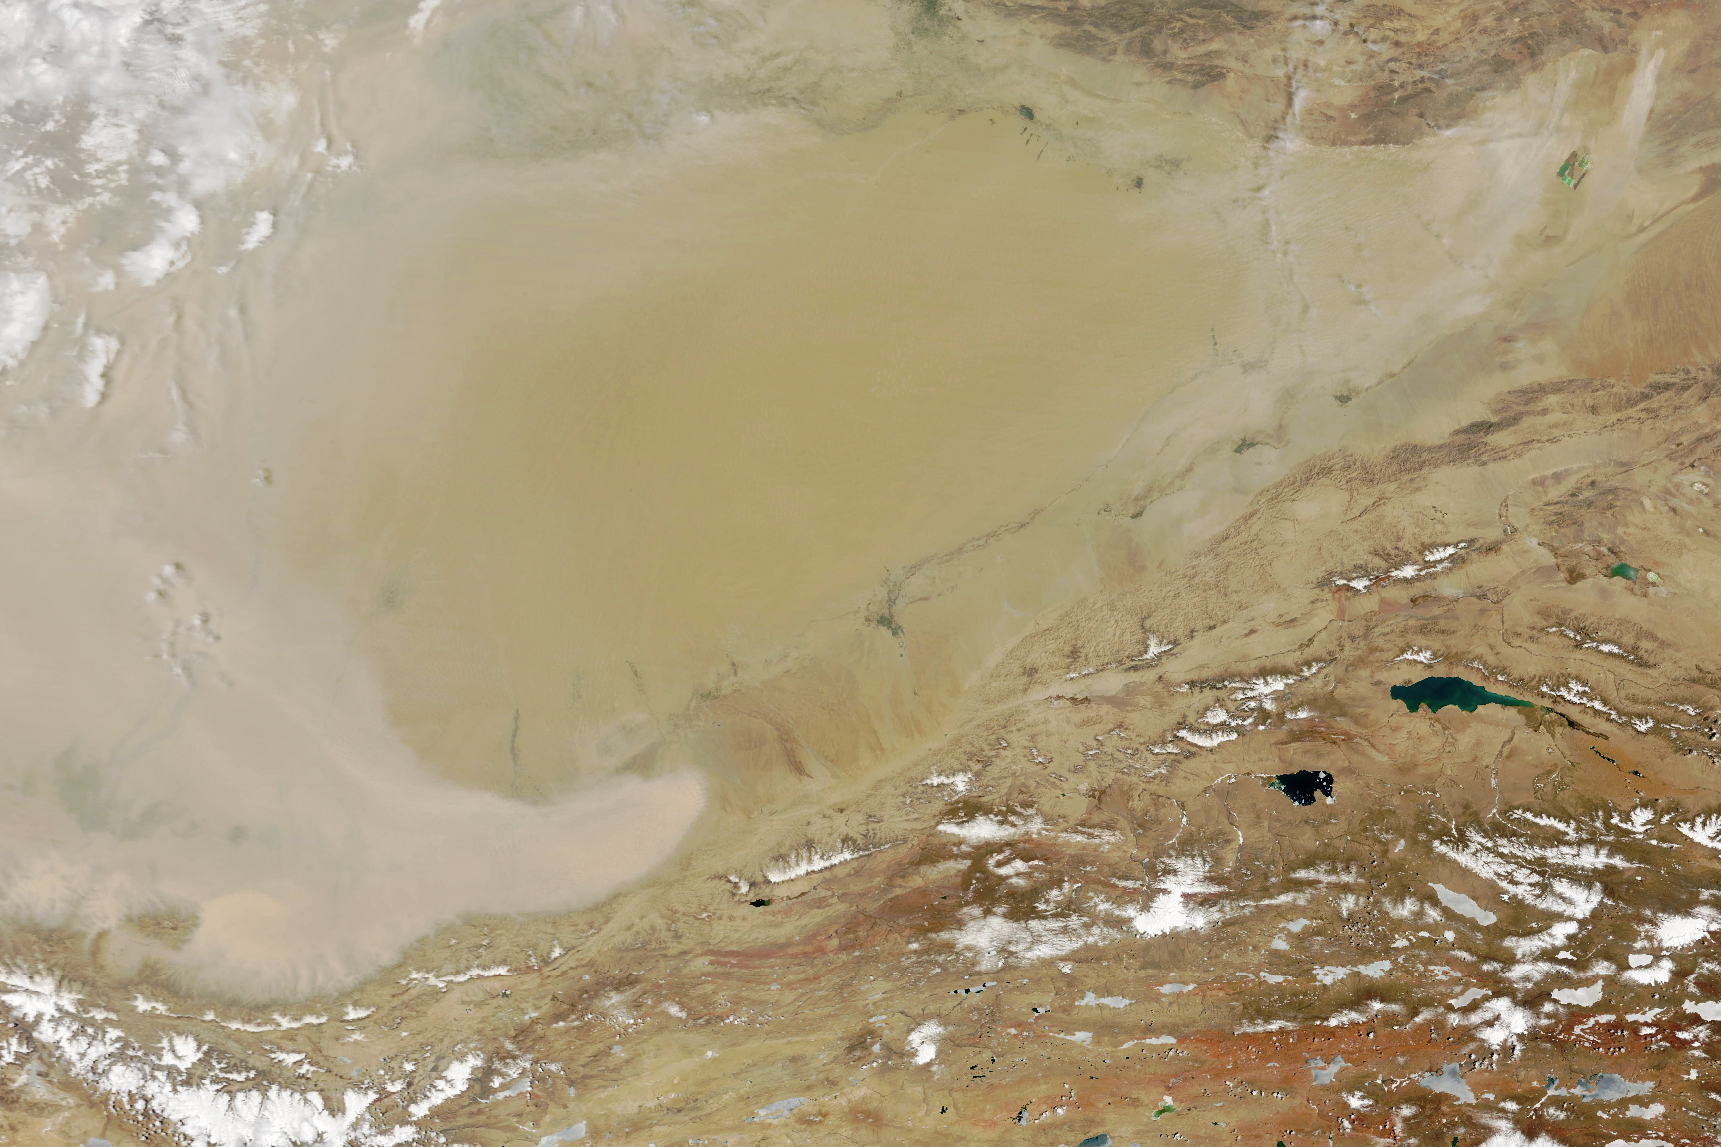 Satellite image of the light tan, nearly off-white, Tarim basin. There are some small lakes in the mountainous region seen lower right and those mountains span center right to lower left, speckled with snow and ice. In the top left there appears to be either ice or wispy cloud cover.